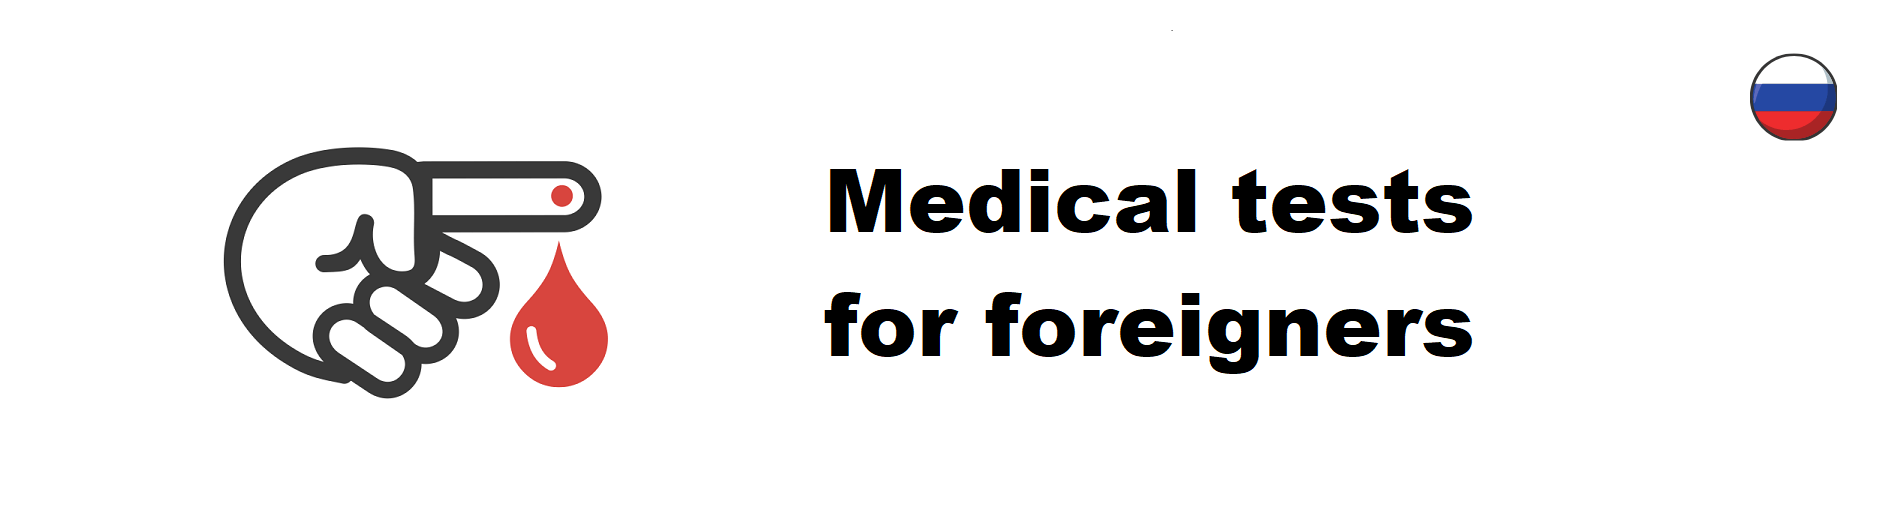 https://www.juralink.nl/wp-content/uploads/2021/12/Medical-tests-for-foreigners.png